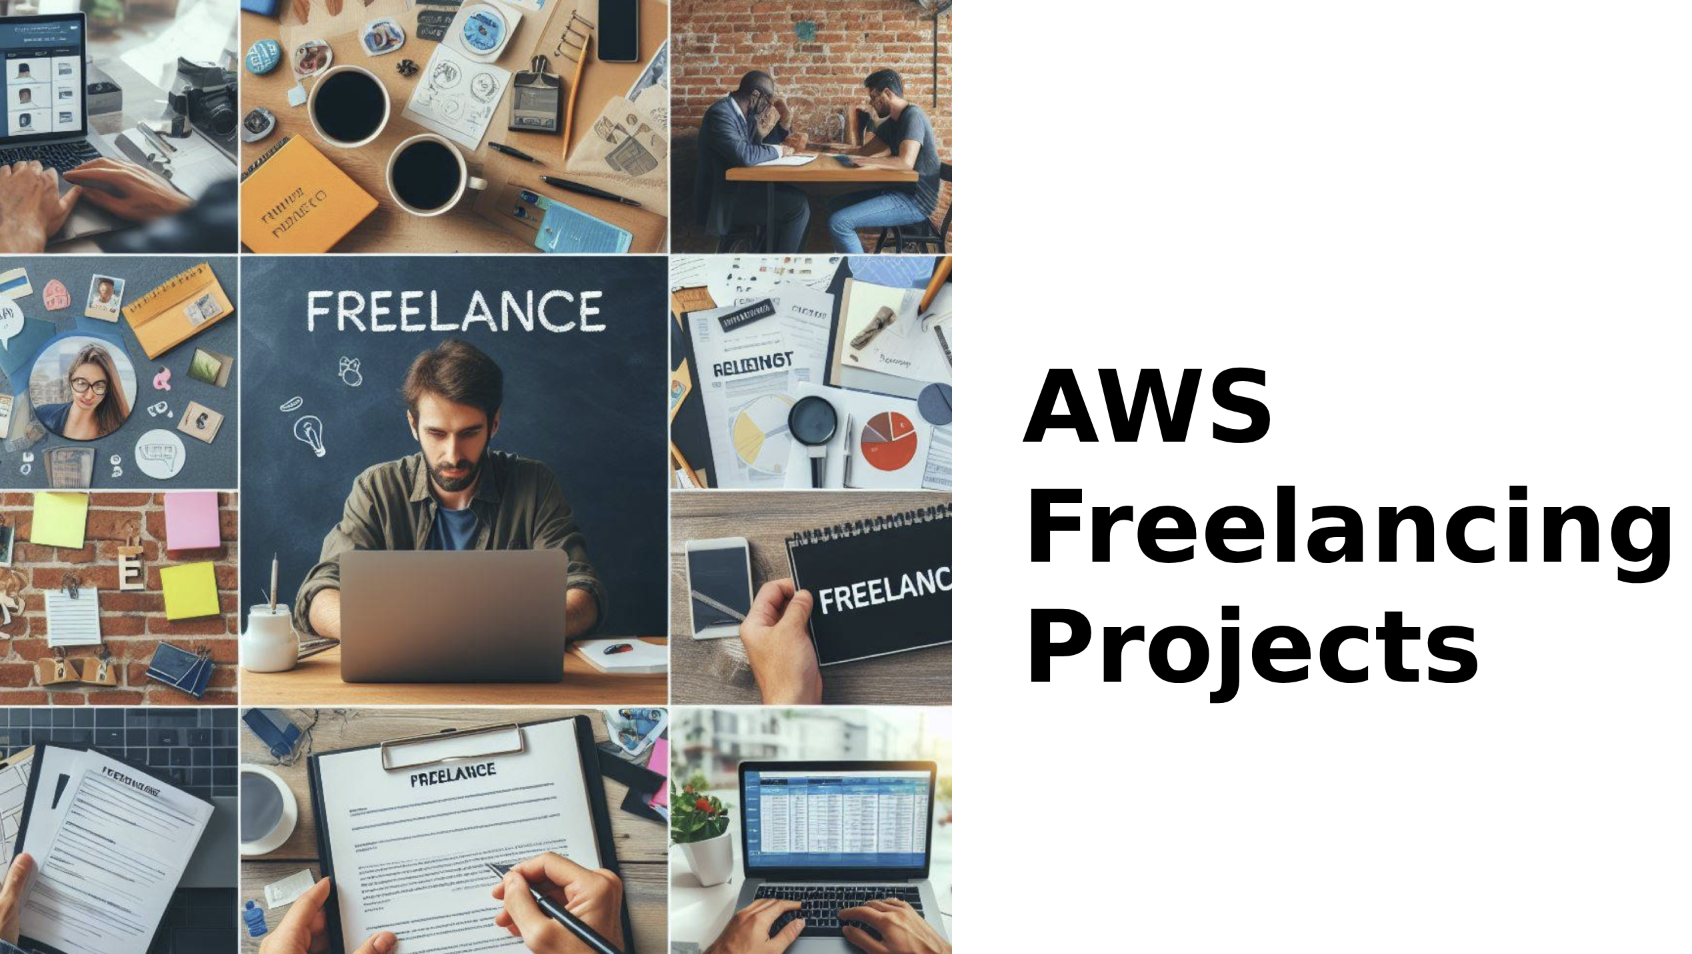 How to Find AWS Cloud Freelancing Projects and Gigs